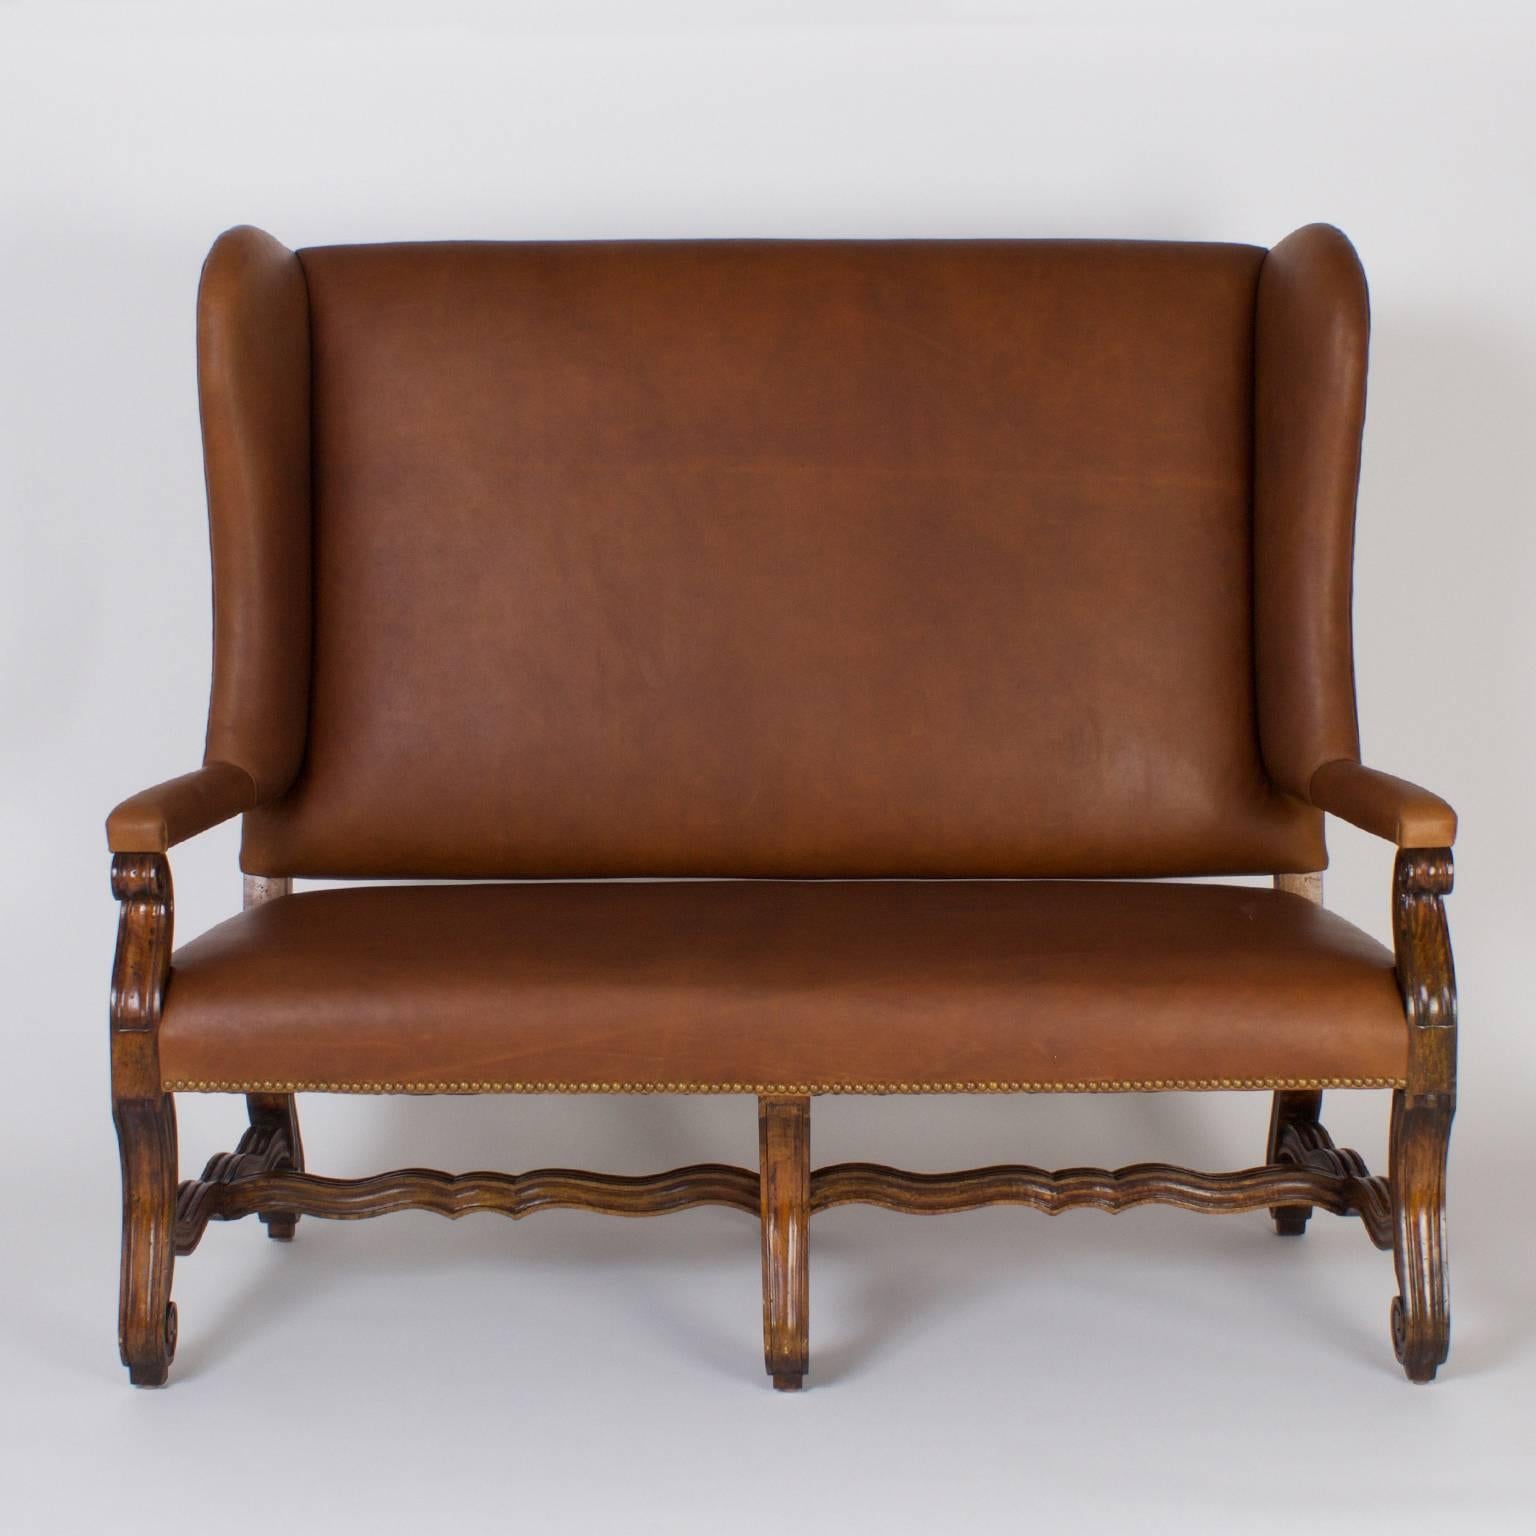 Stately Ralph Lauren brown leather bench, settee or couch with a bold upright stance, reminiscent of an antique Spanish or French court design. Featuring a winged back, padded arms and dramatic scrolled legs joined by scalloped stretchers.
    